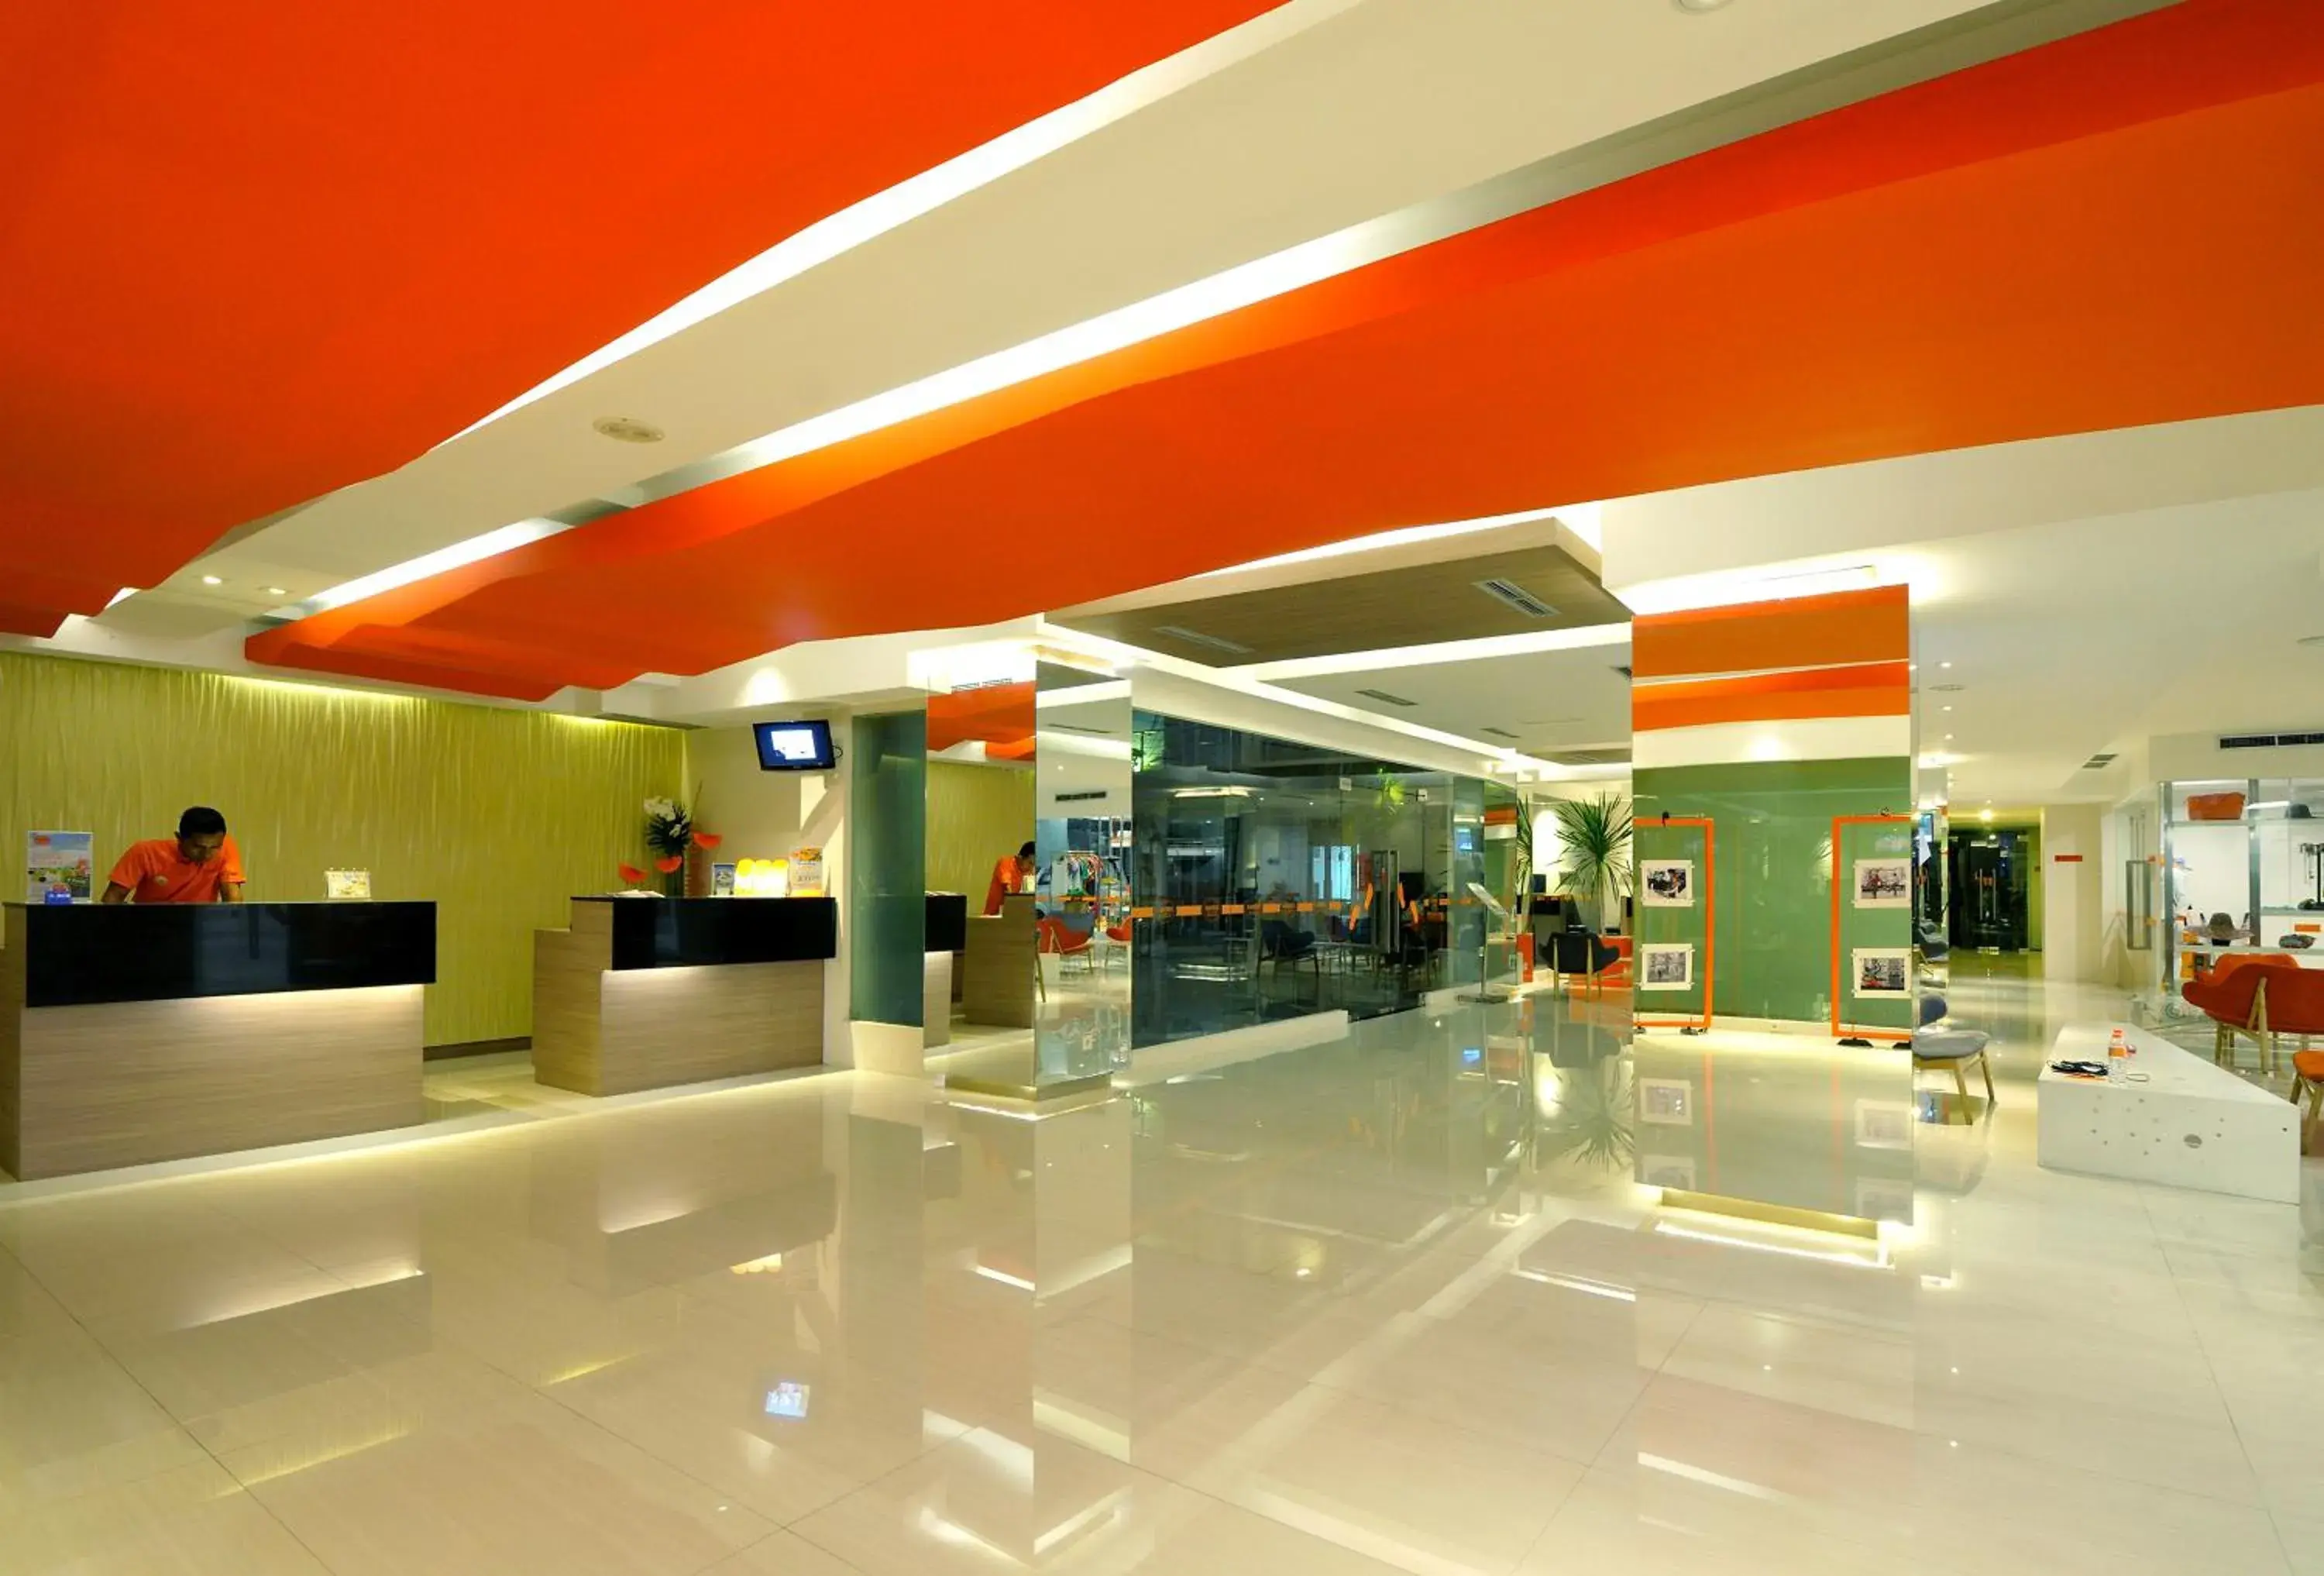 Lobby or reception in HOTEL and RESIDENCES Riverview Kuta - Bali (Associated HARRIS)